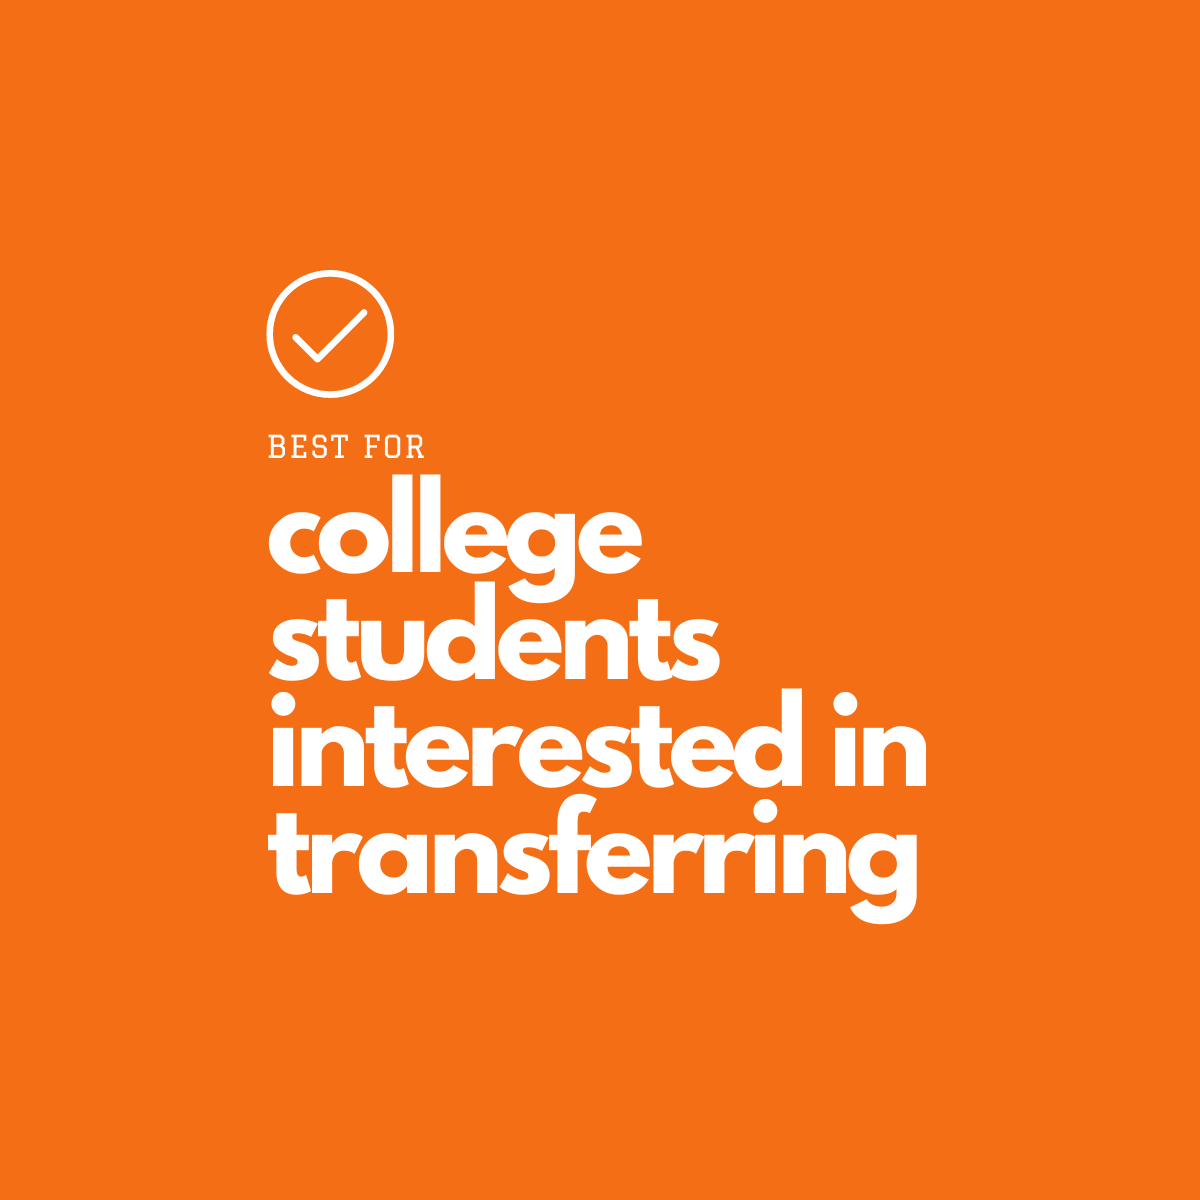 Best for college students interested in transferring